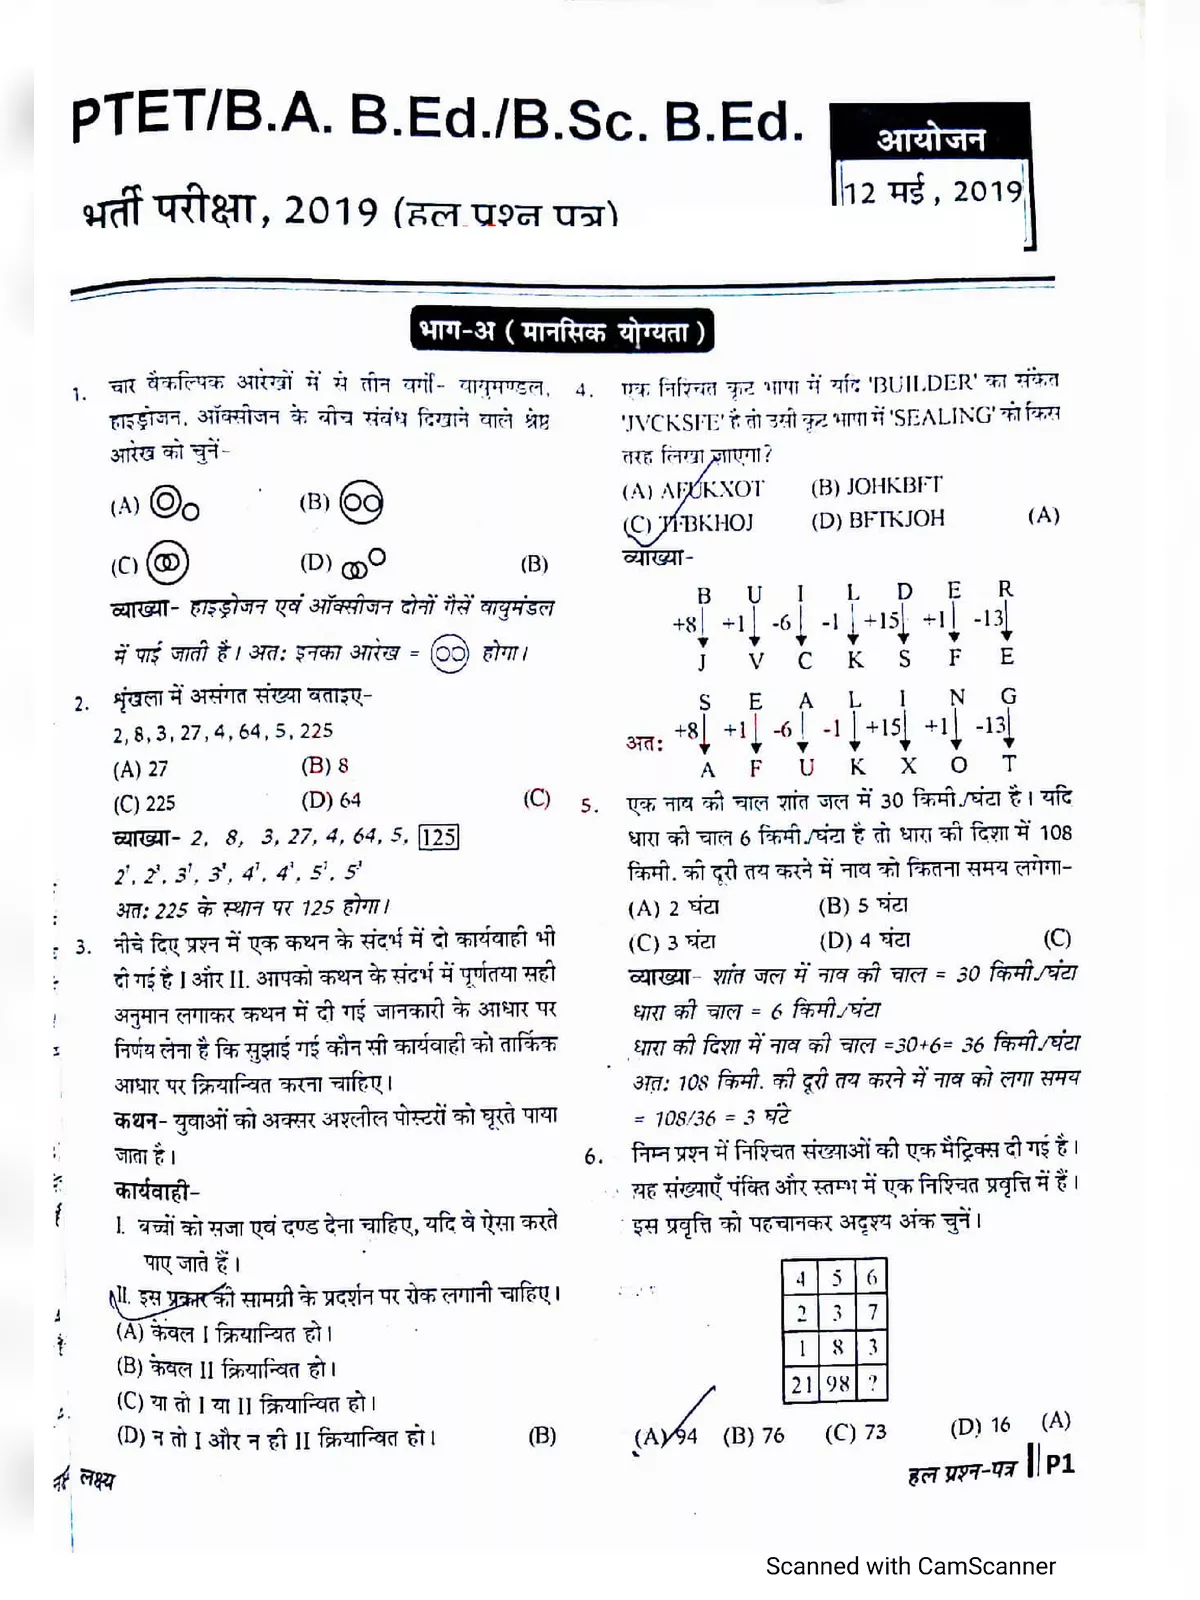 Rajasthan PTET Question Papers 2020